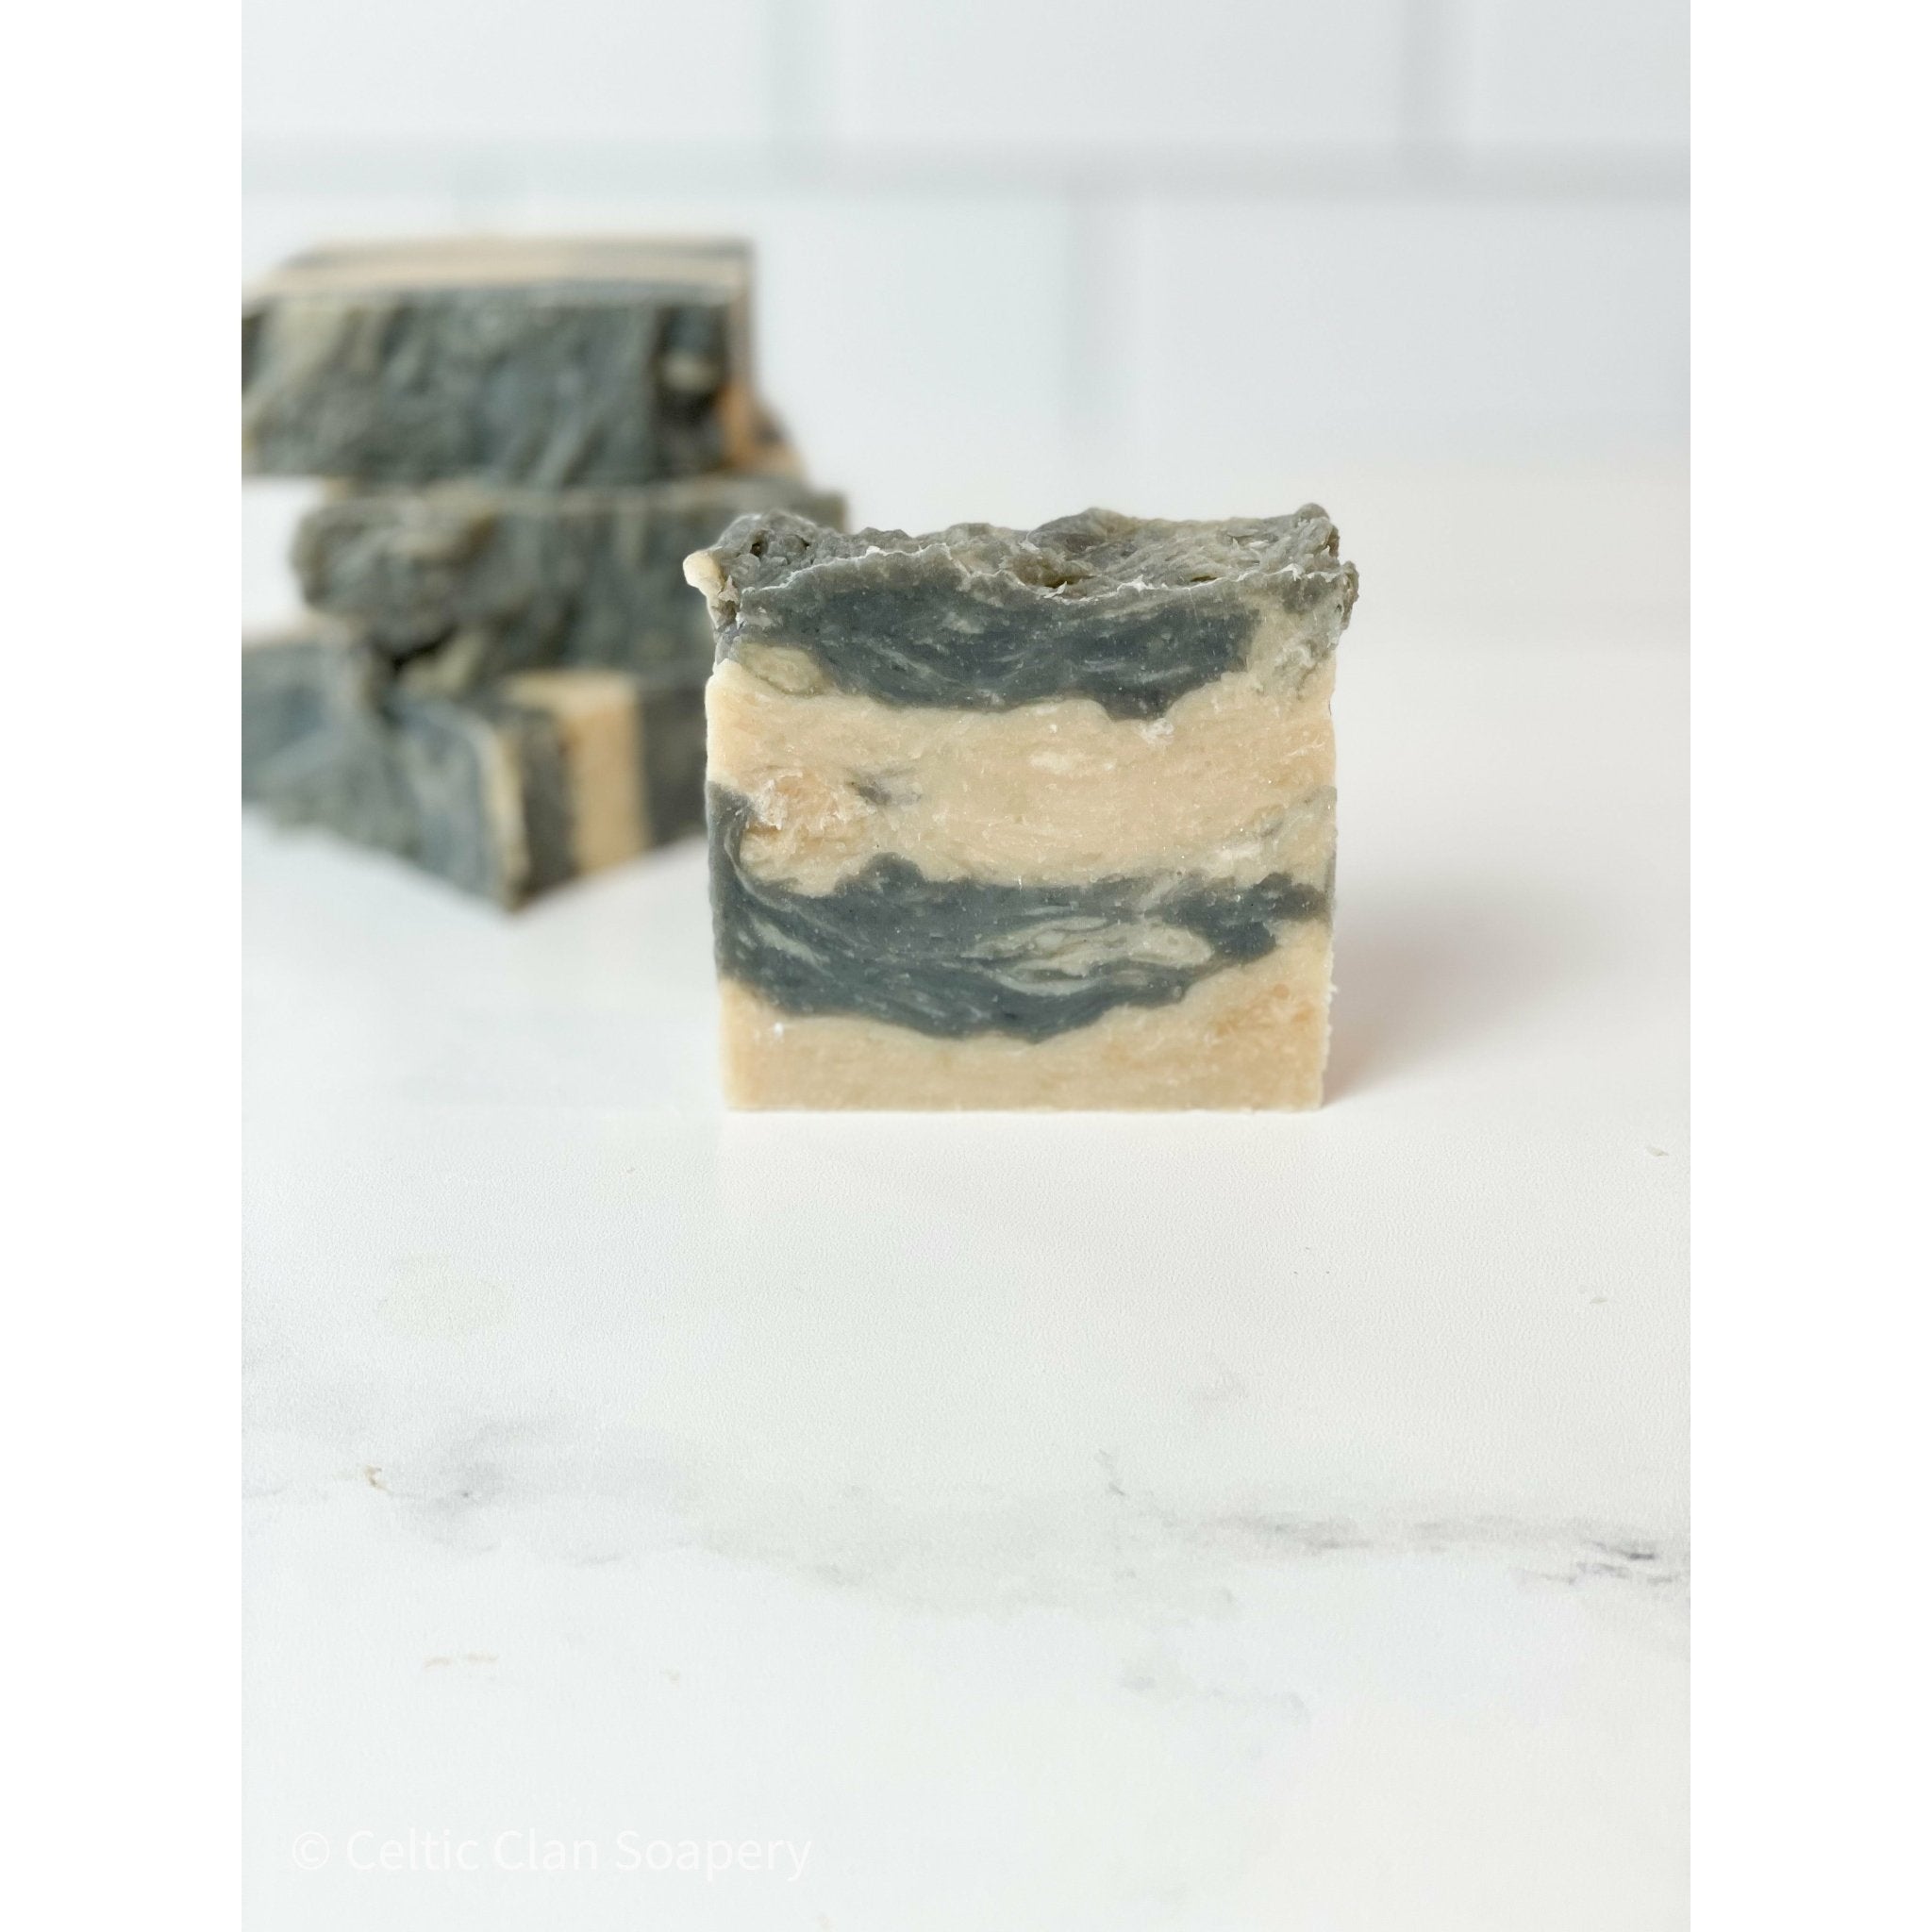 Assorted Essential Oil Soap | Handmade French Milled | Goat Milk & Aloe Vera - Celtic Clan Soapery LLC